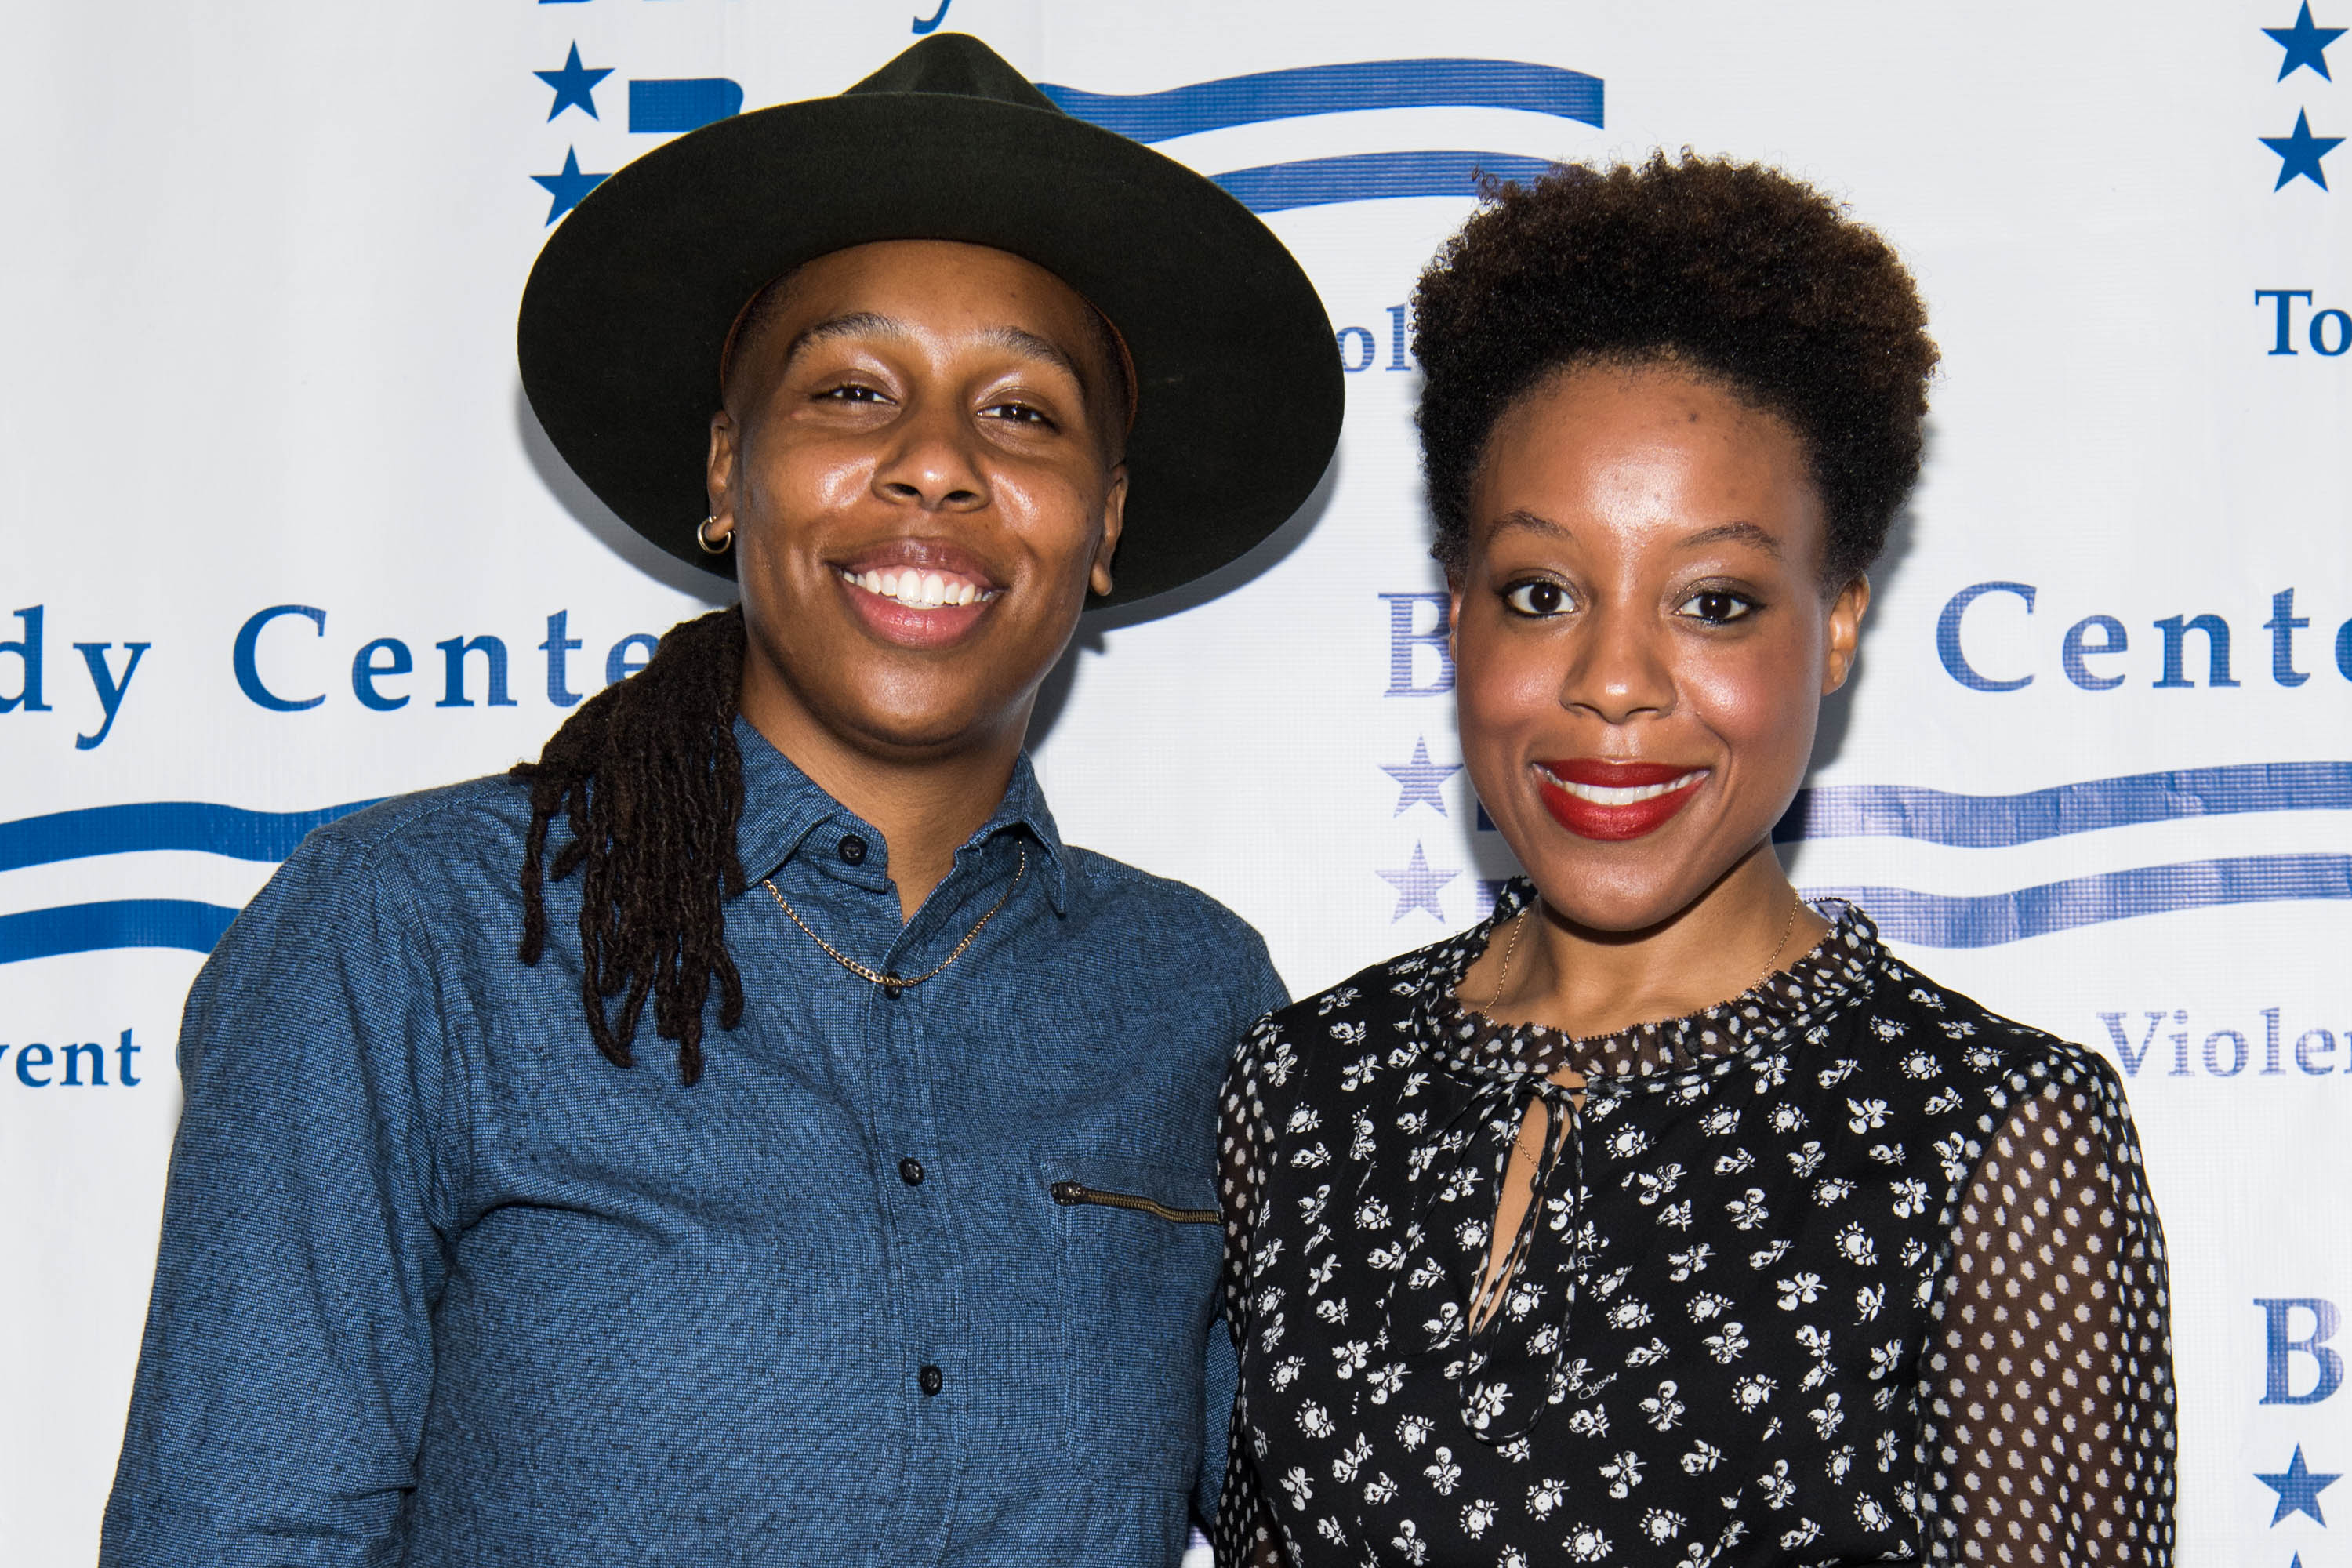 Lena Waithe and Alana Mayo attending an awards gala in June 2017. | Photo: Getty Images